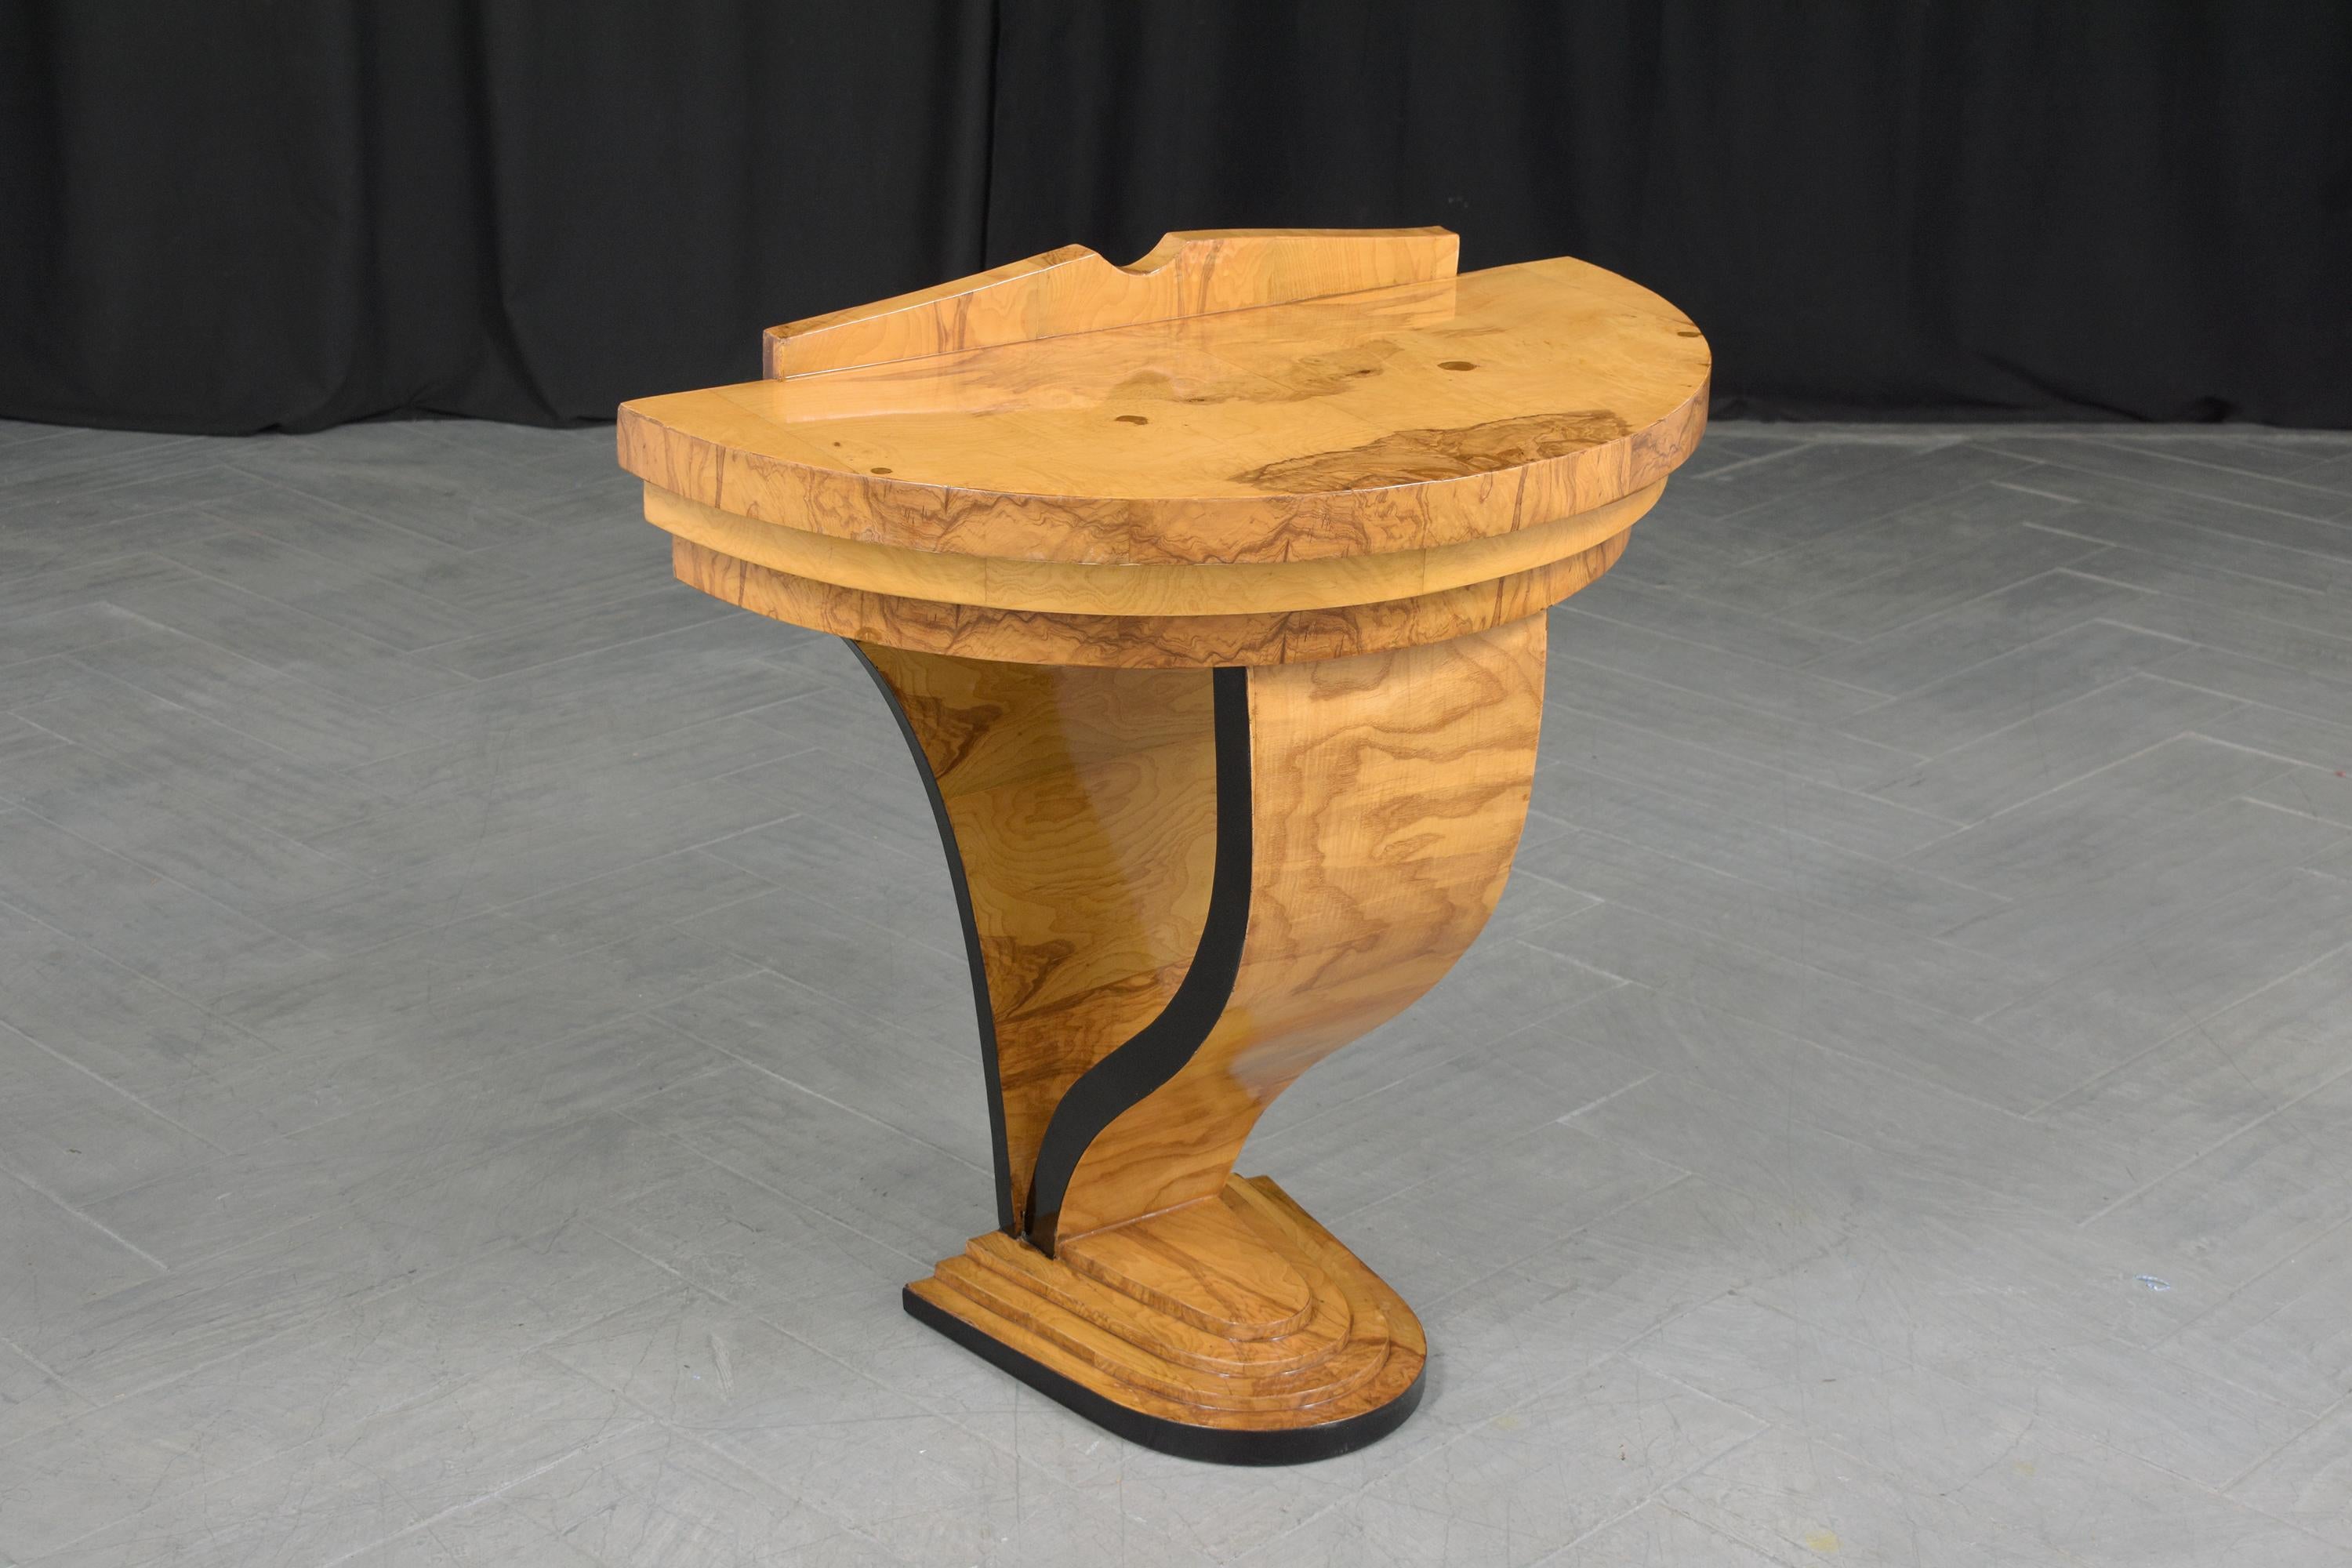 Step into the extraordinary with our stunning vintage Art Deco wall console, meticulously handcrafted from high-quality wood and birch veneers. This breathtaking piece, in great condition, has been newly restored and refinished by our dedicated team